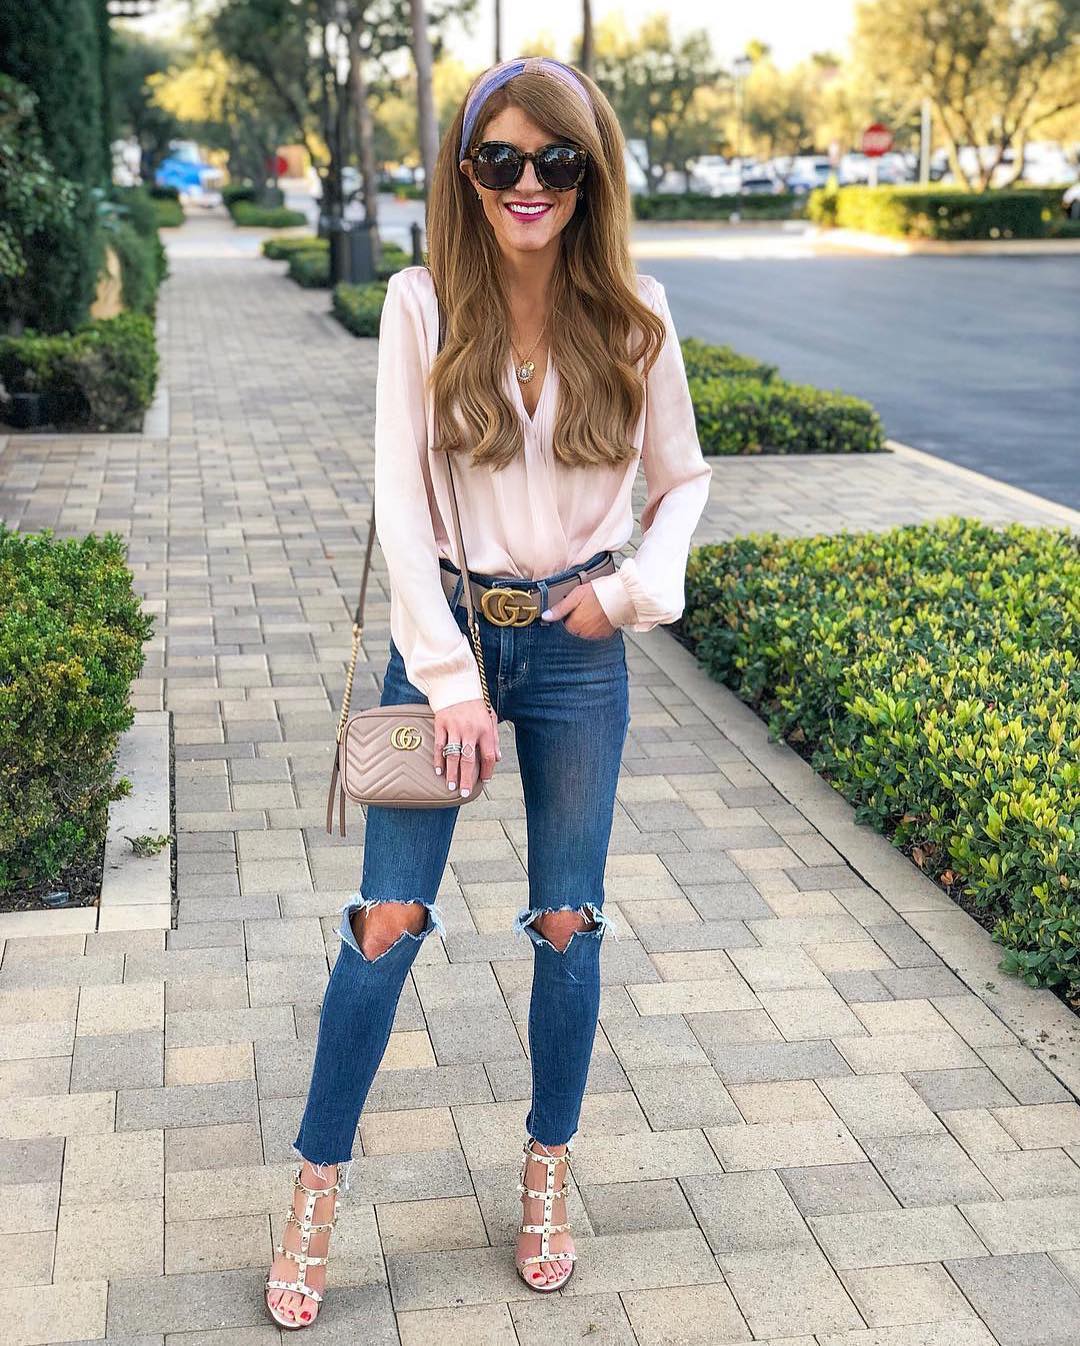 Cream Blush Blouse And Knee Ripped Blue
Jeans Outfit